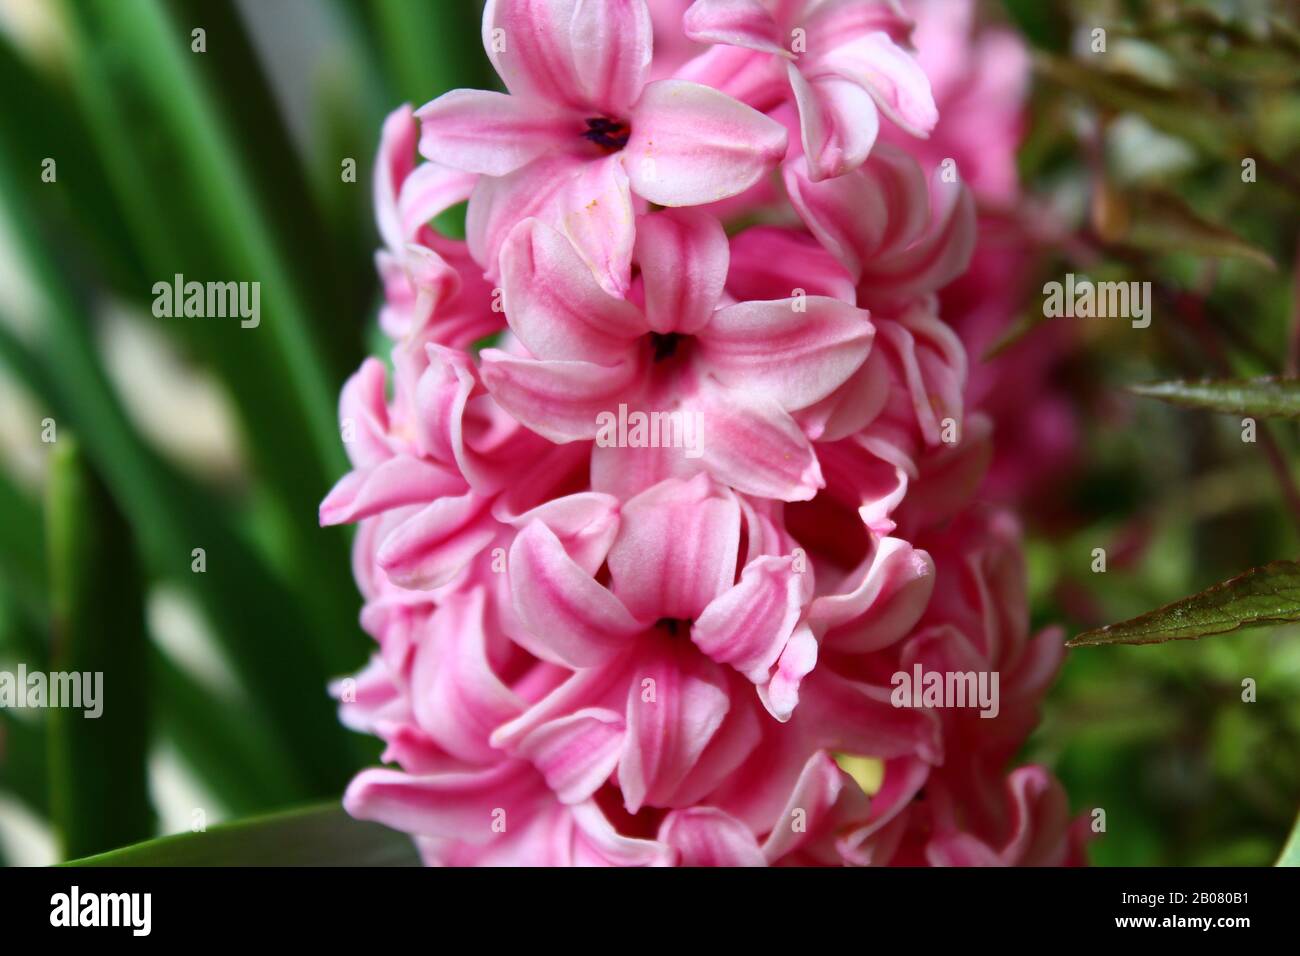 The picture shows a pink hyacinth in the garden Stock Photo